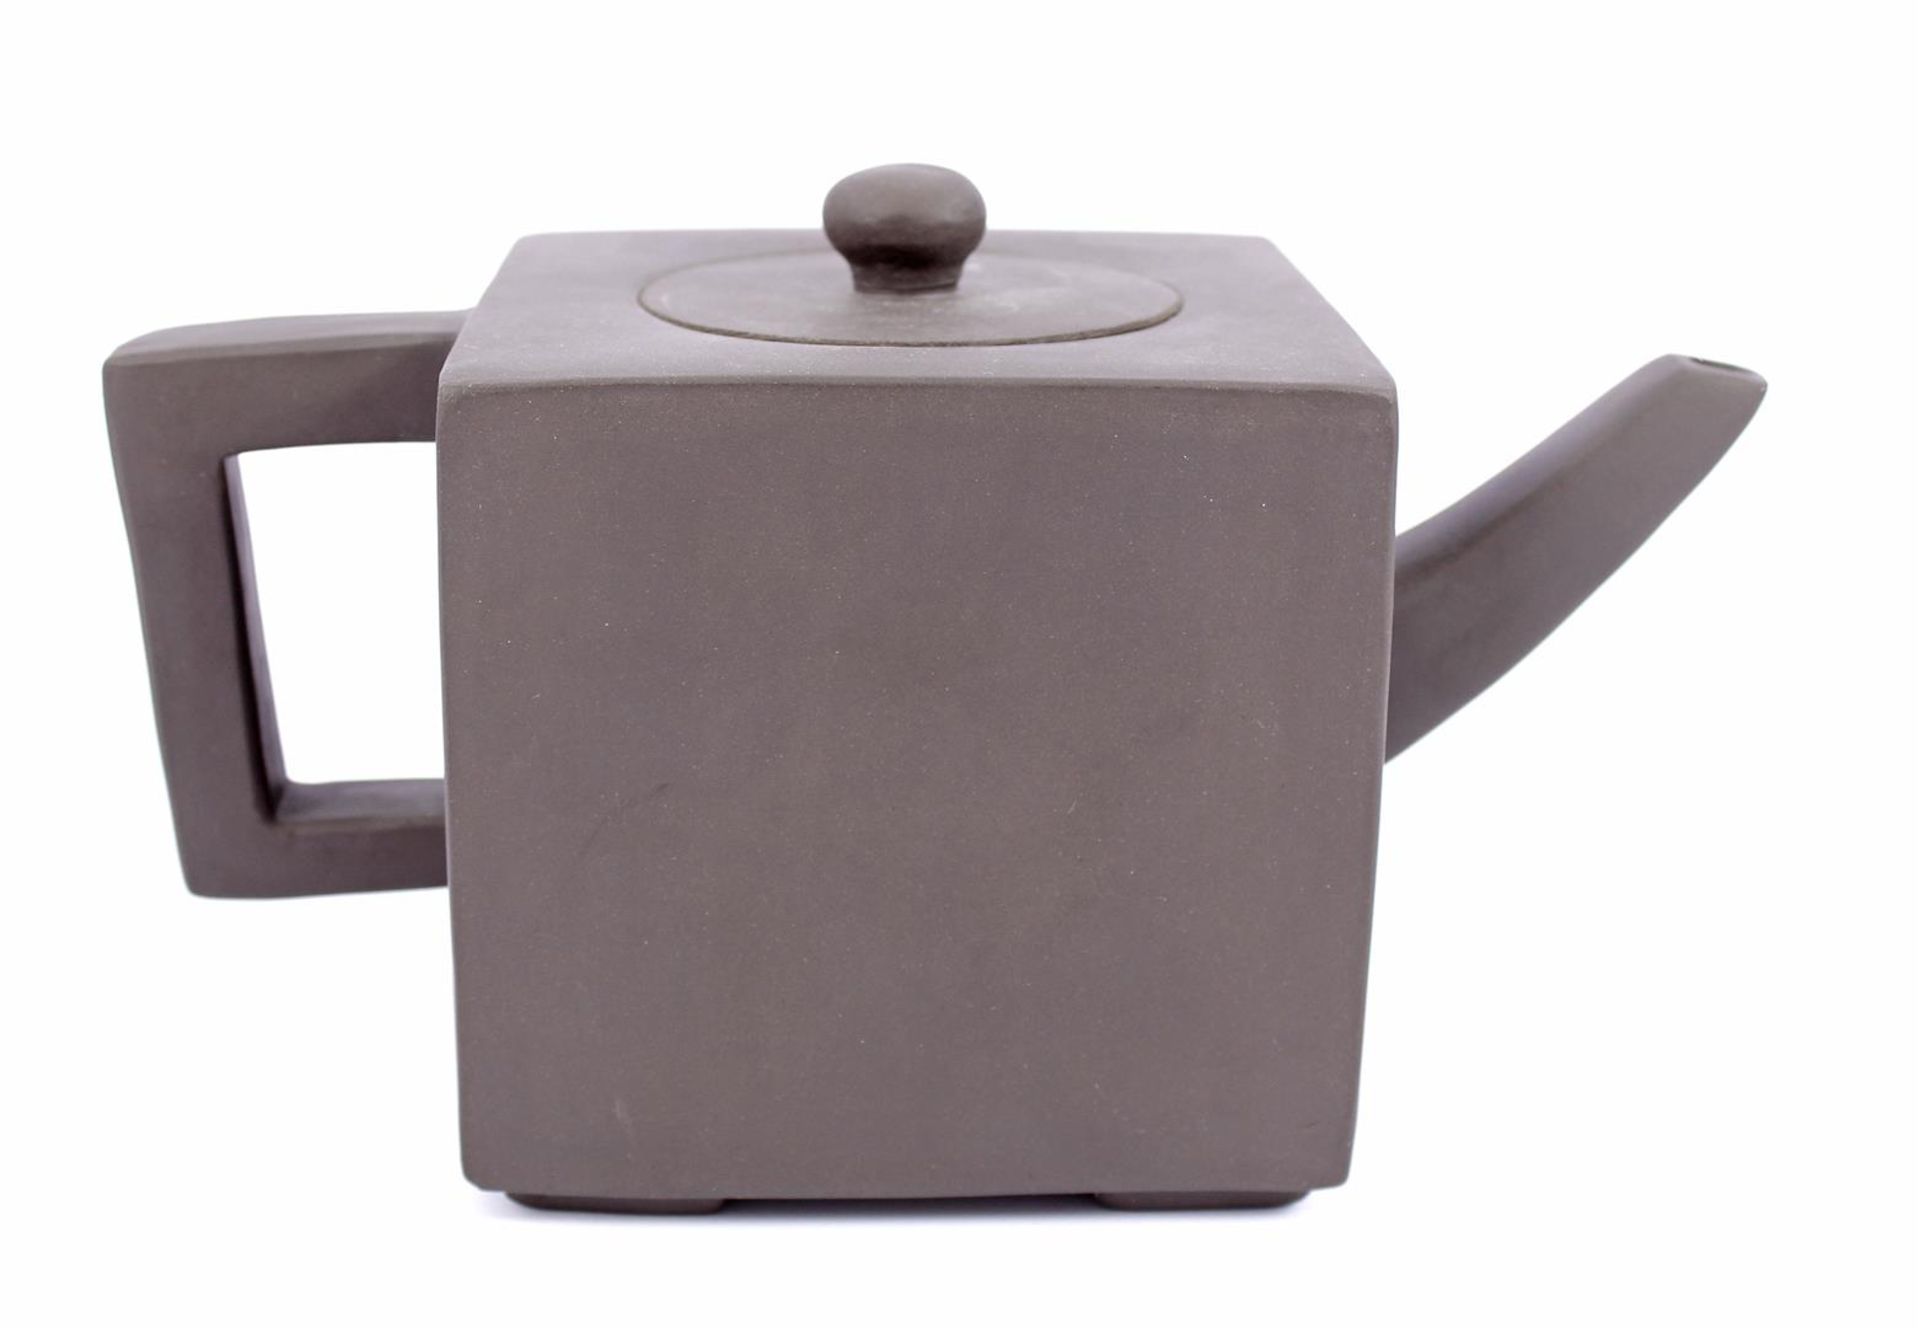 Yixing teapot, square model, marked on the bottom, China 20th century, 14 cm high